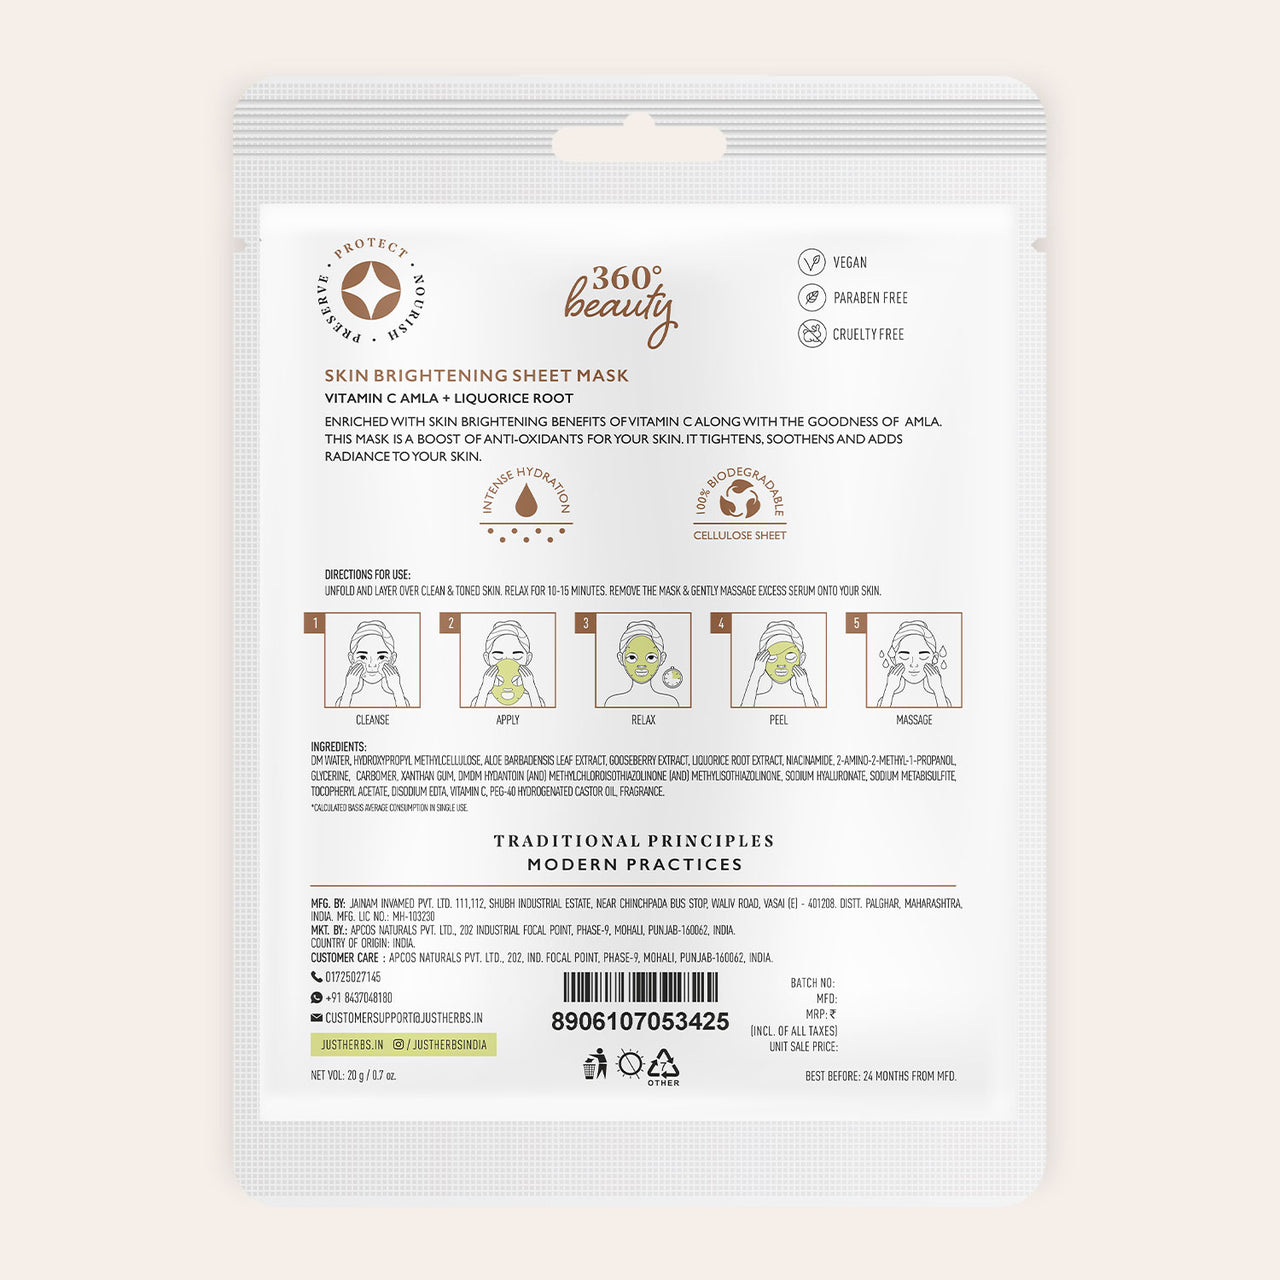 Vitamin C Amla Sheet Mask with Liquorice Root for Skin Brightening - pack of 4